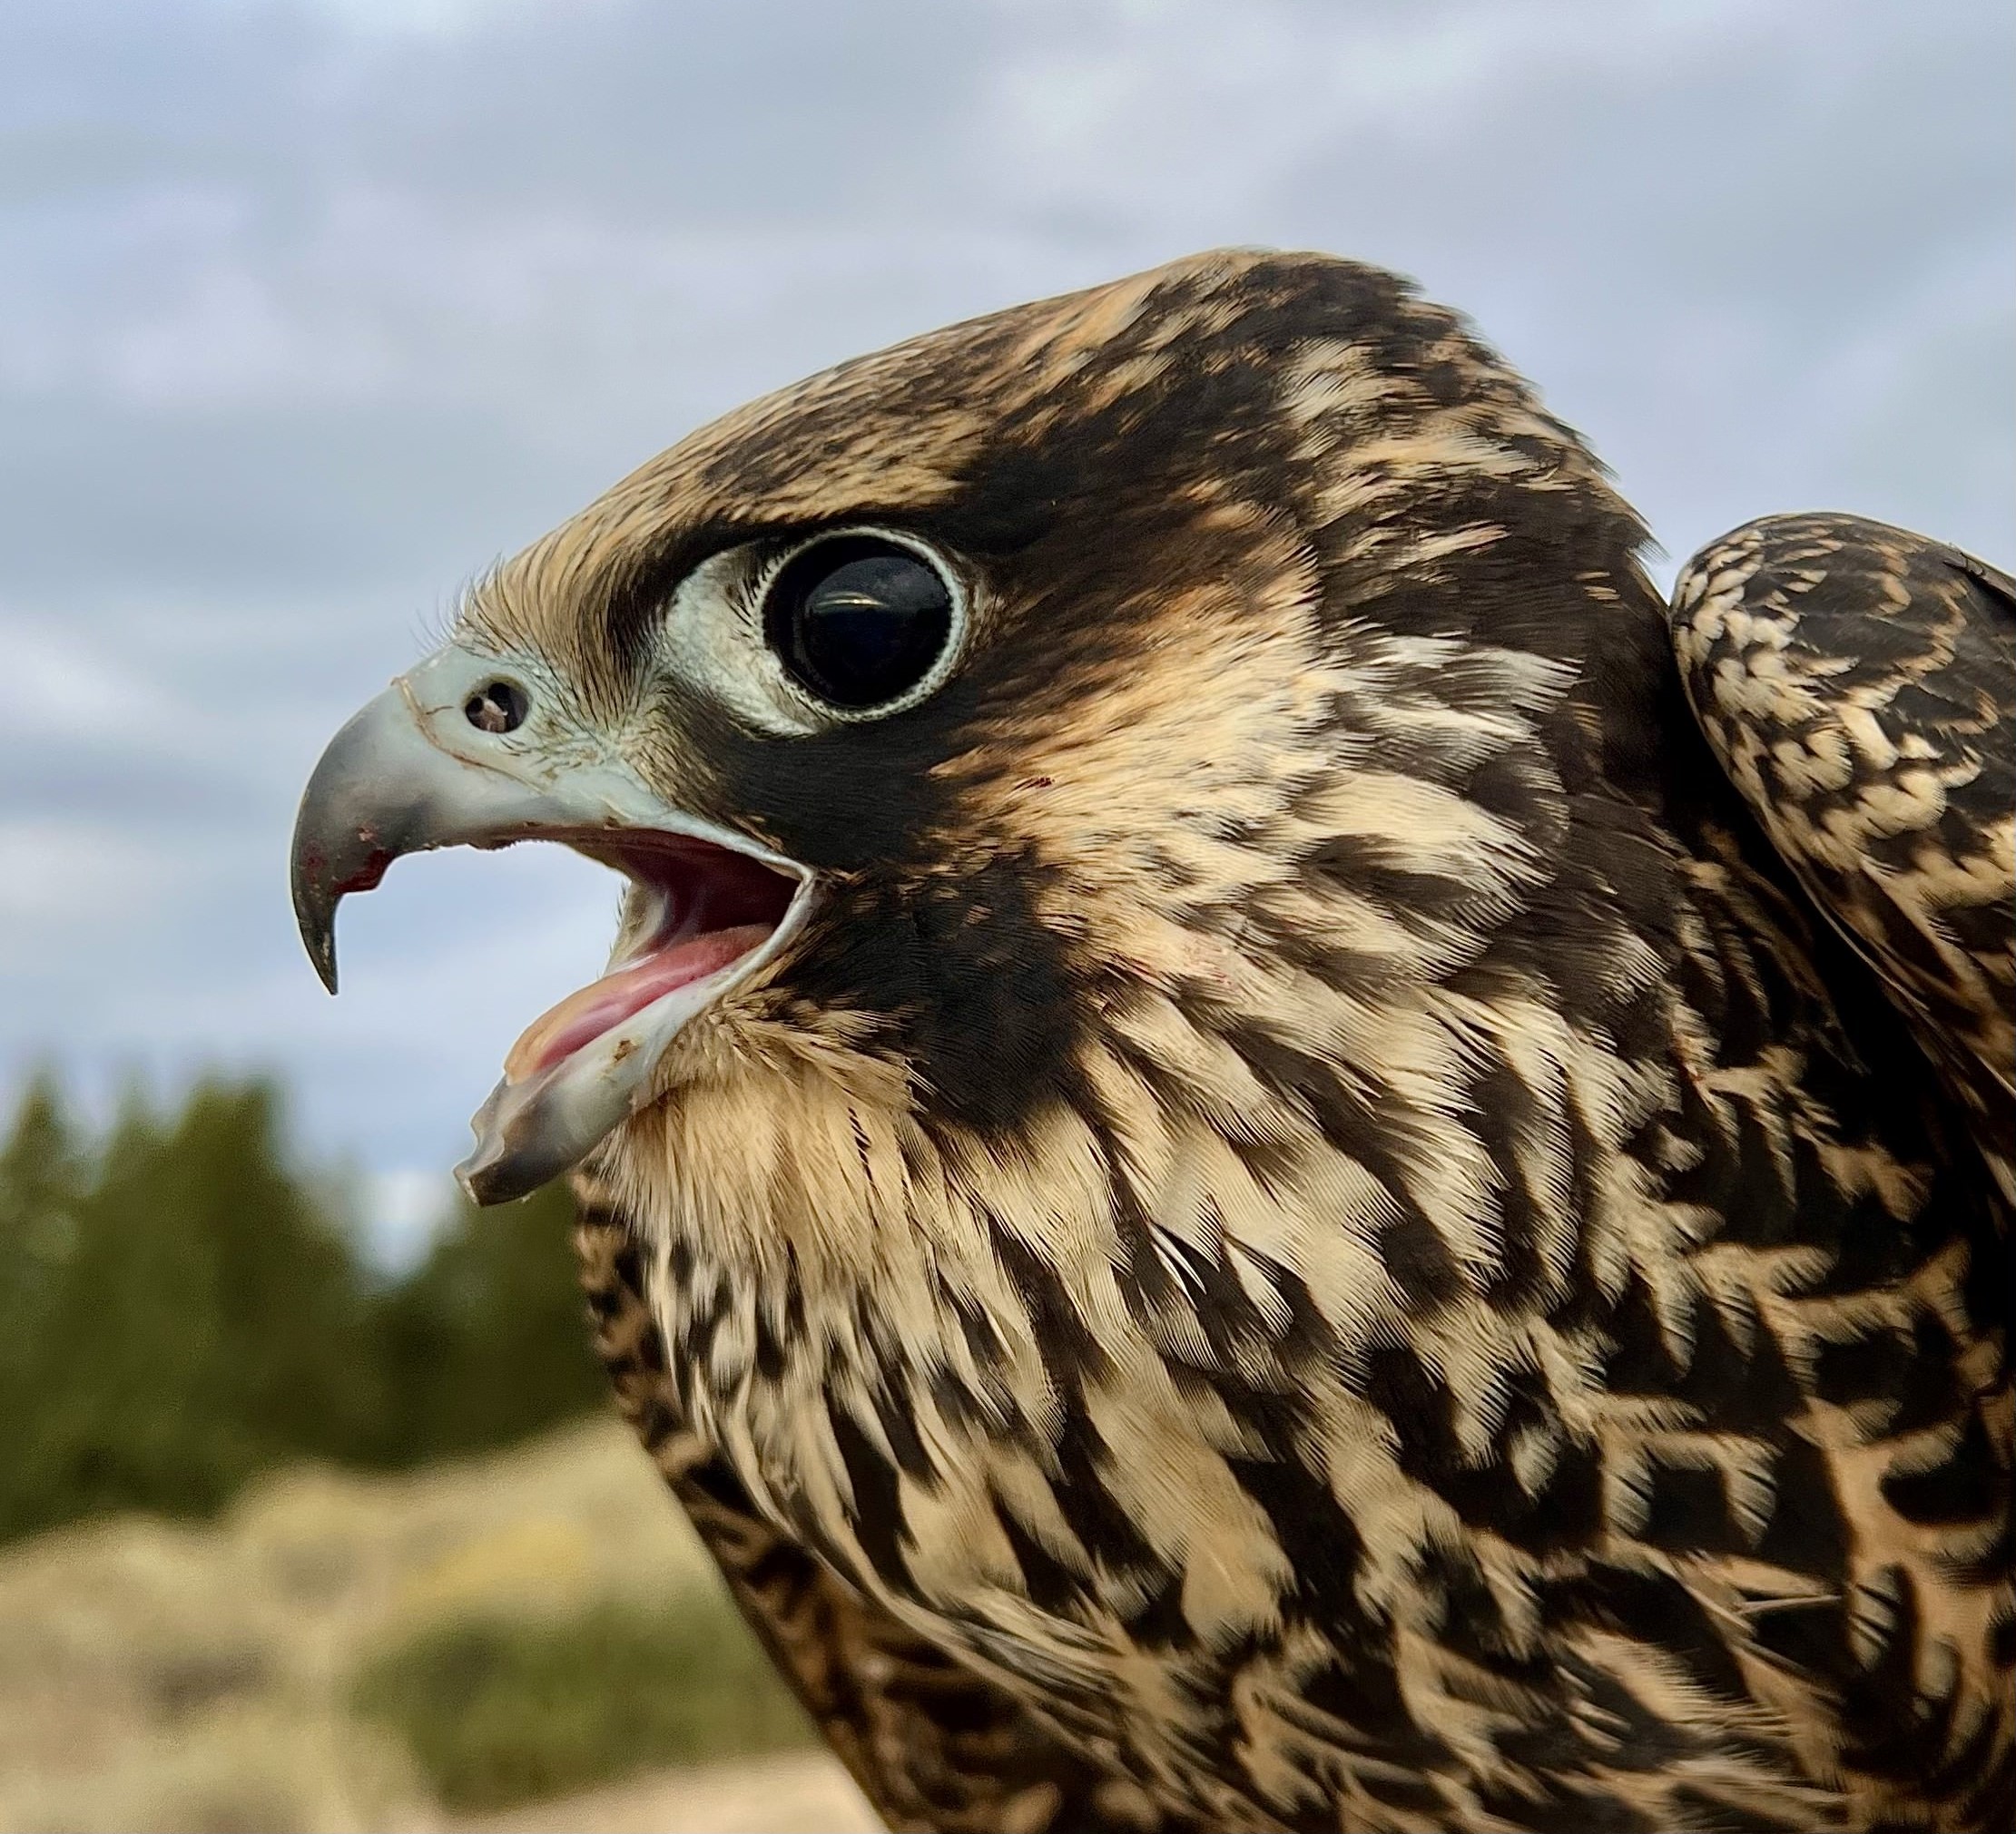 a young peregrine falcon looks off camera with intense pure black eyes. her sharply hooked beak is open with a fierce expression. Her pale bluish bill and eye skin, and buffy tan feathers show that she is a young bird